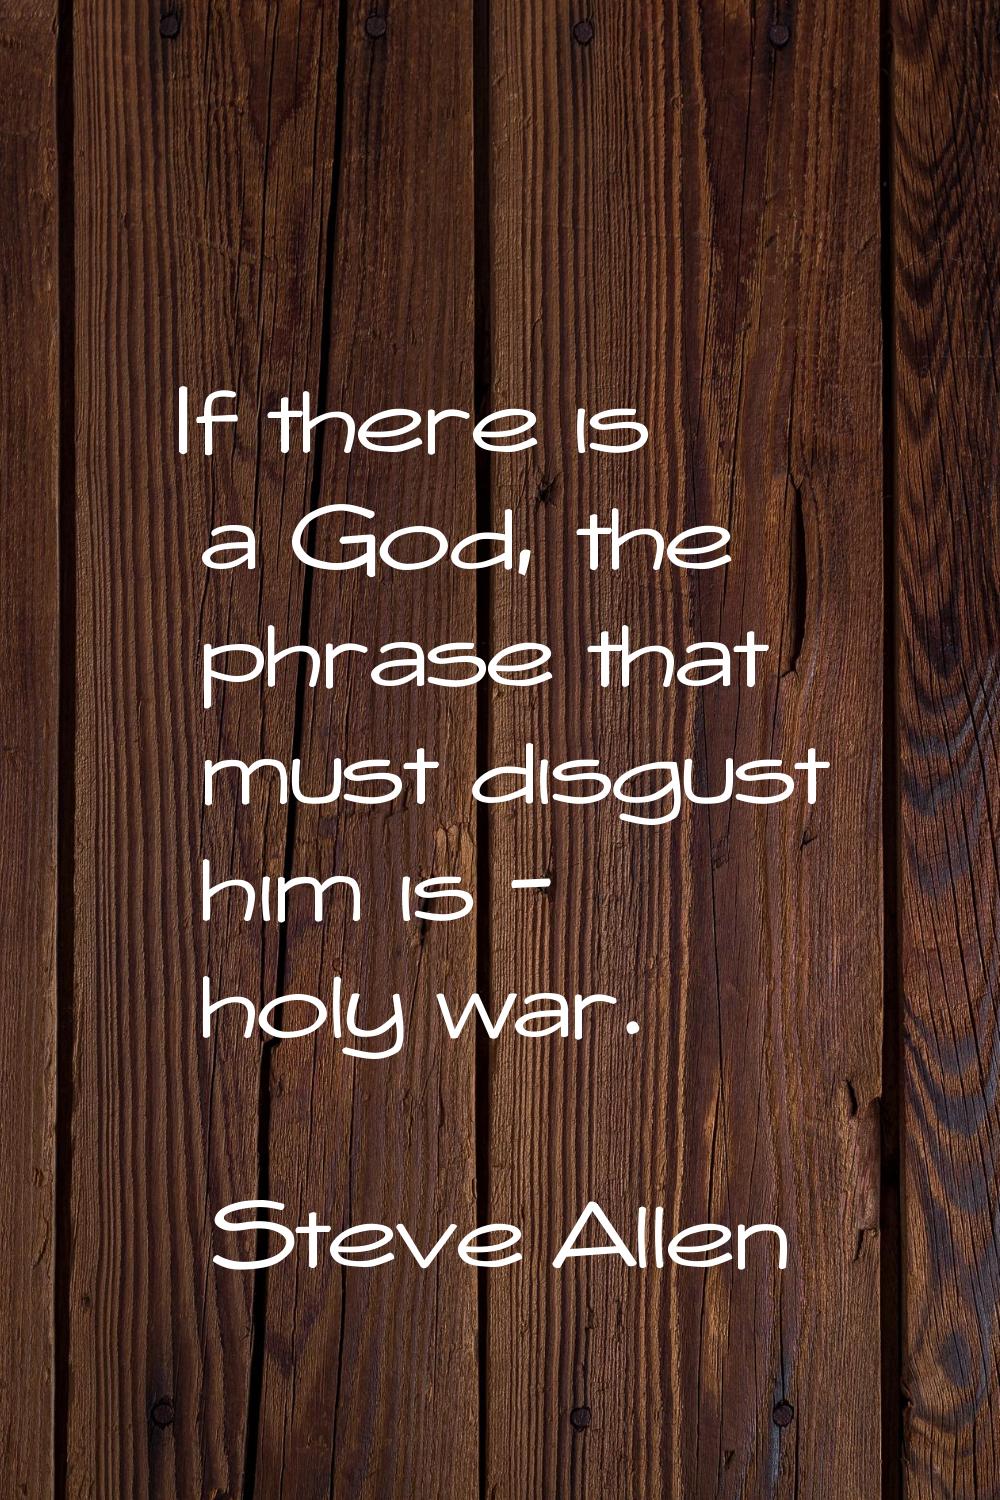 If there is a God, the phrase that must disgust him is - holy war.